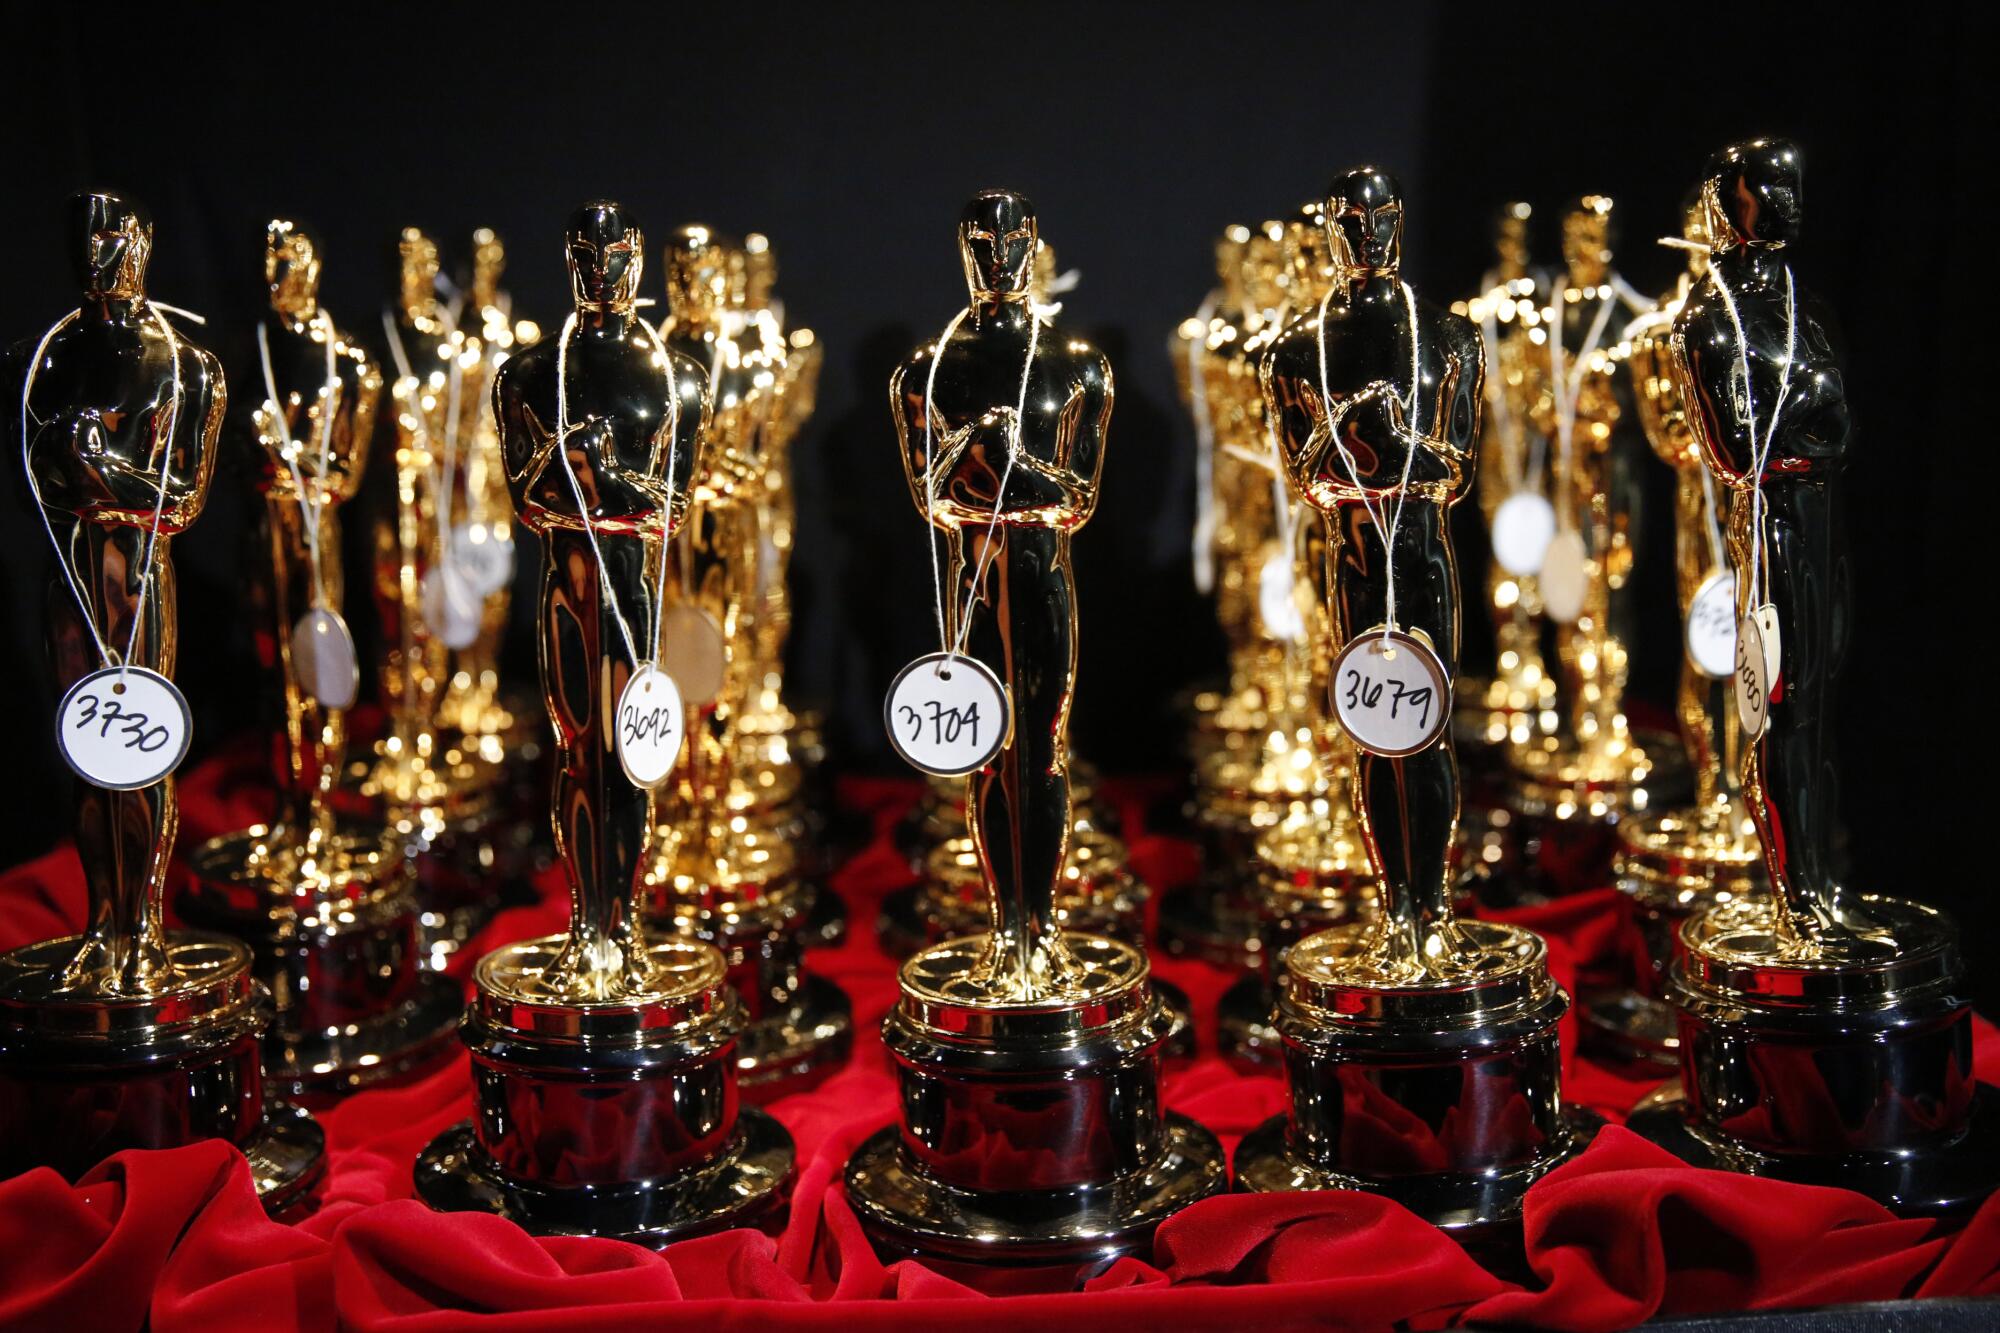 A bunch of Oscars trophies positioned on a red table